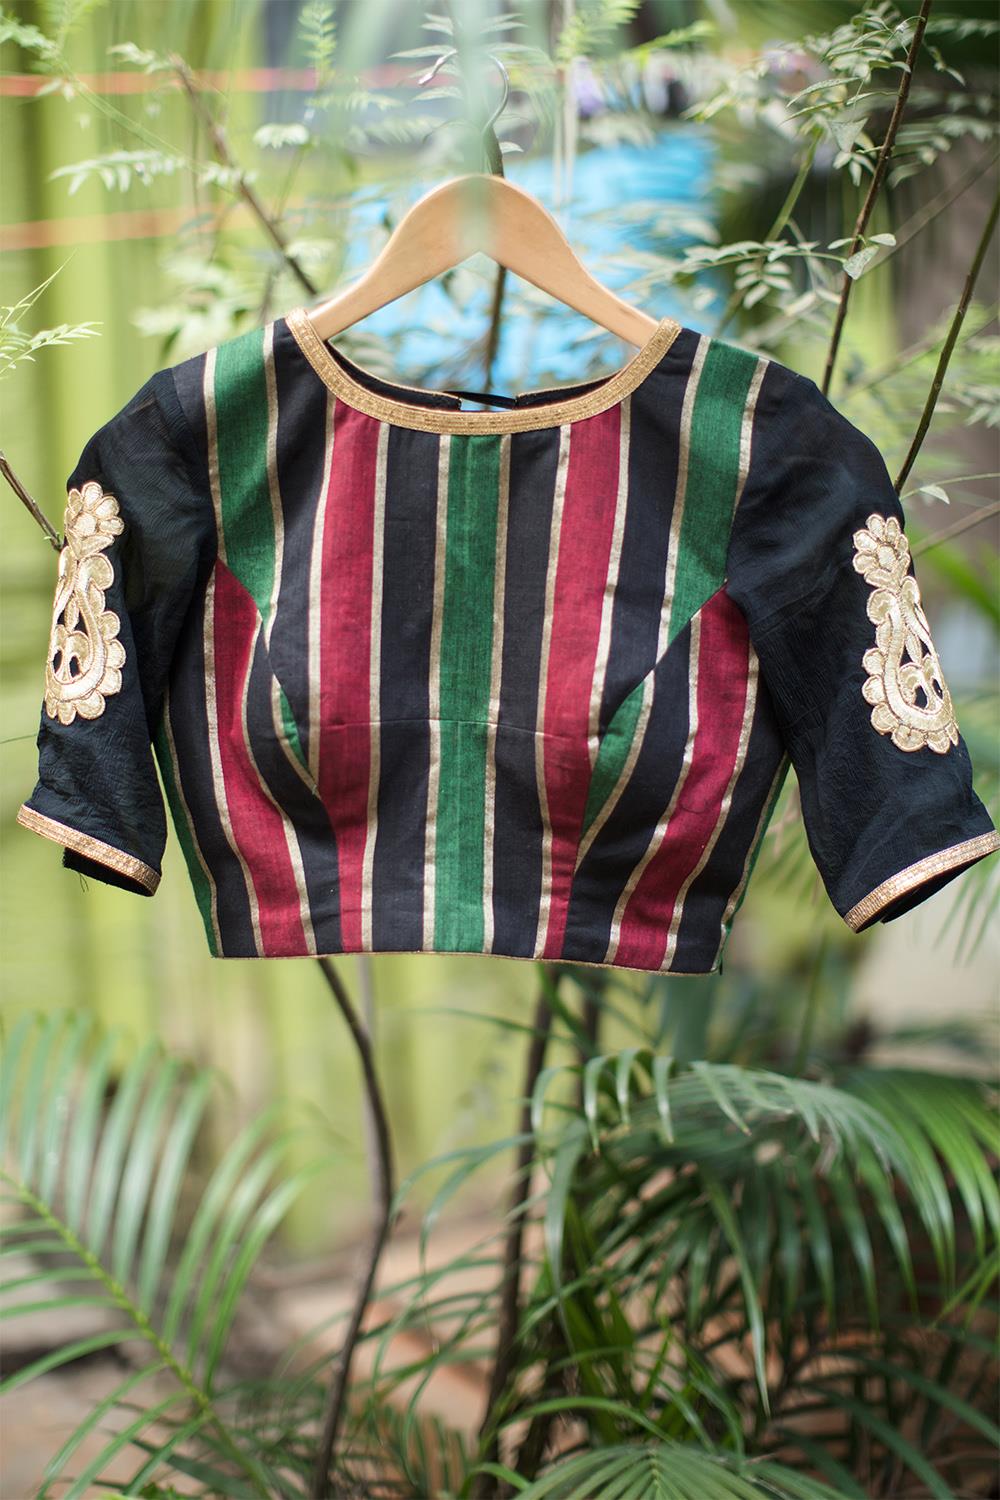 Black Zari cotton blouse with applique on sheer sleeve